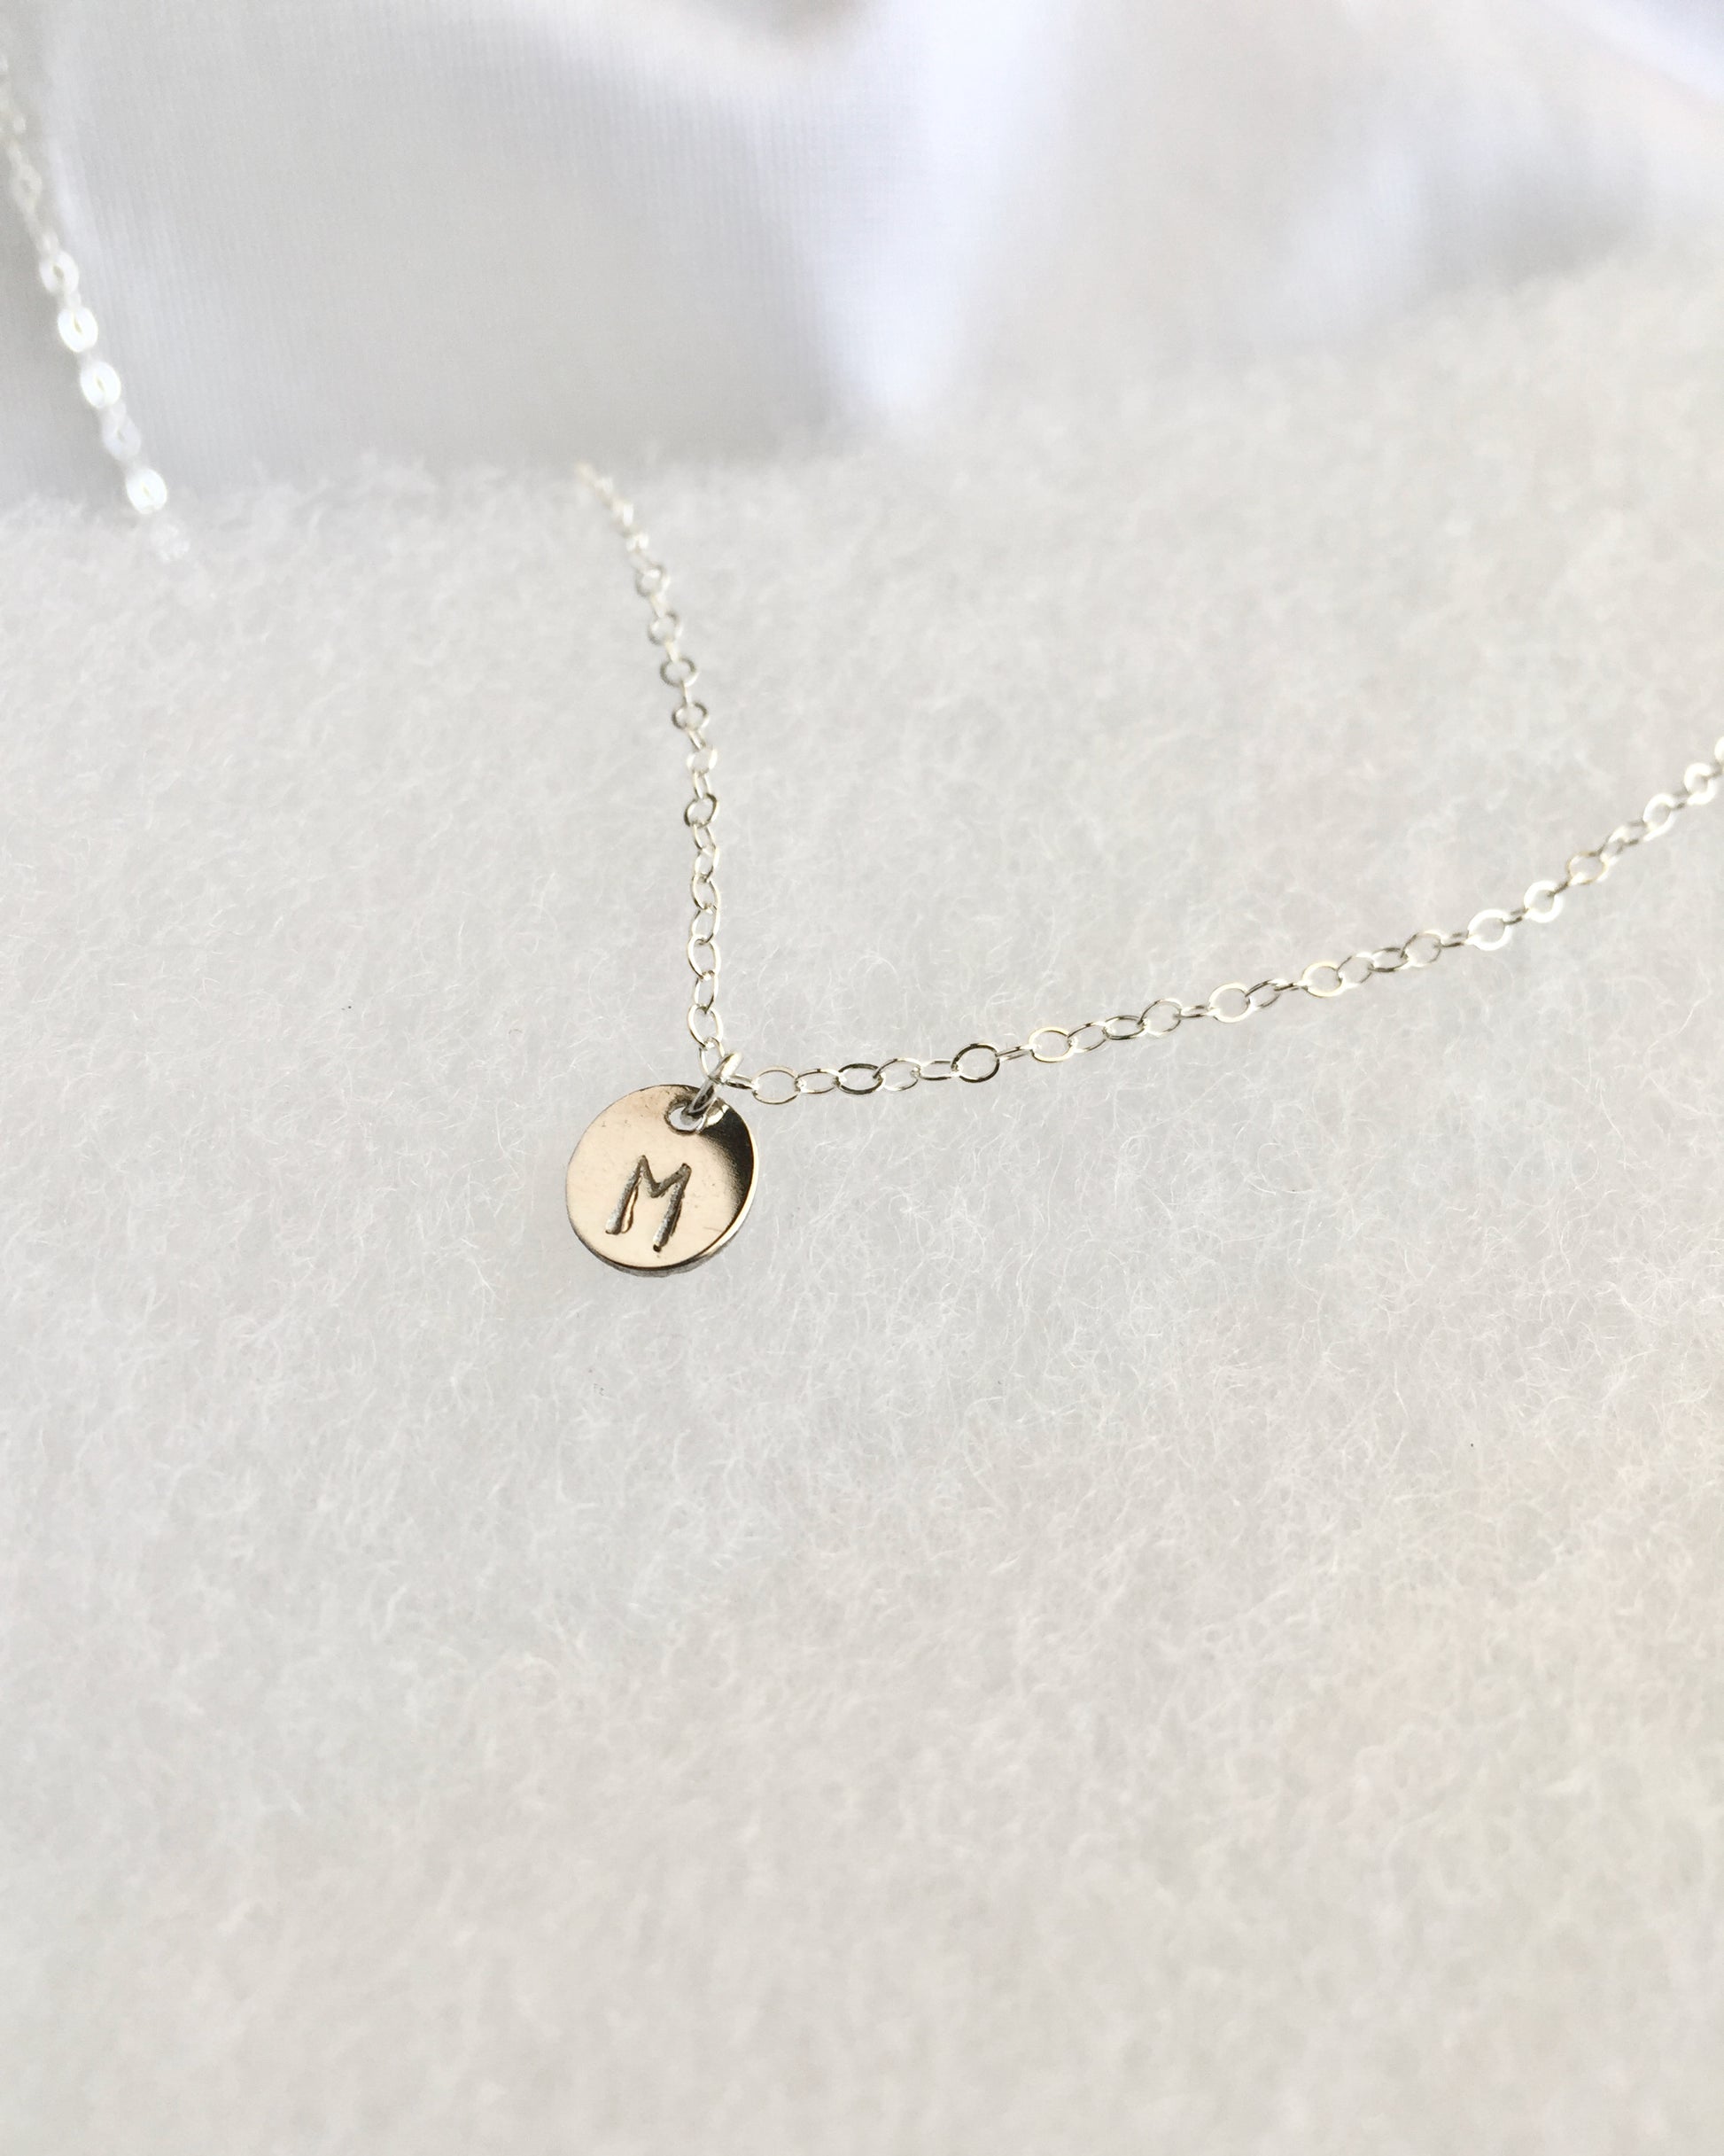 Dainty Initial Necklace In Sterling Silver or Gold Filled | Personalized Necklace | IB Jewelry